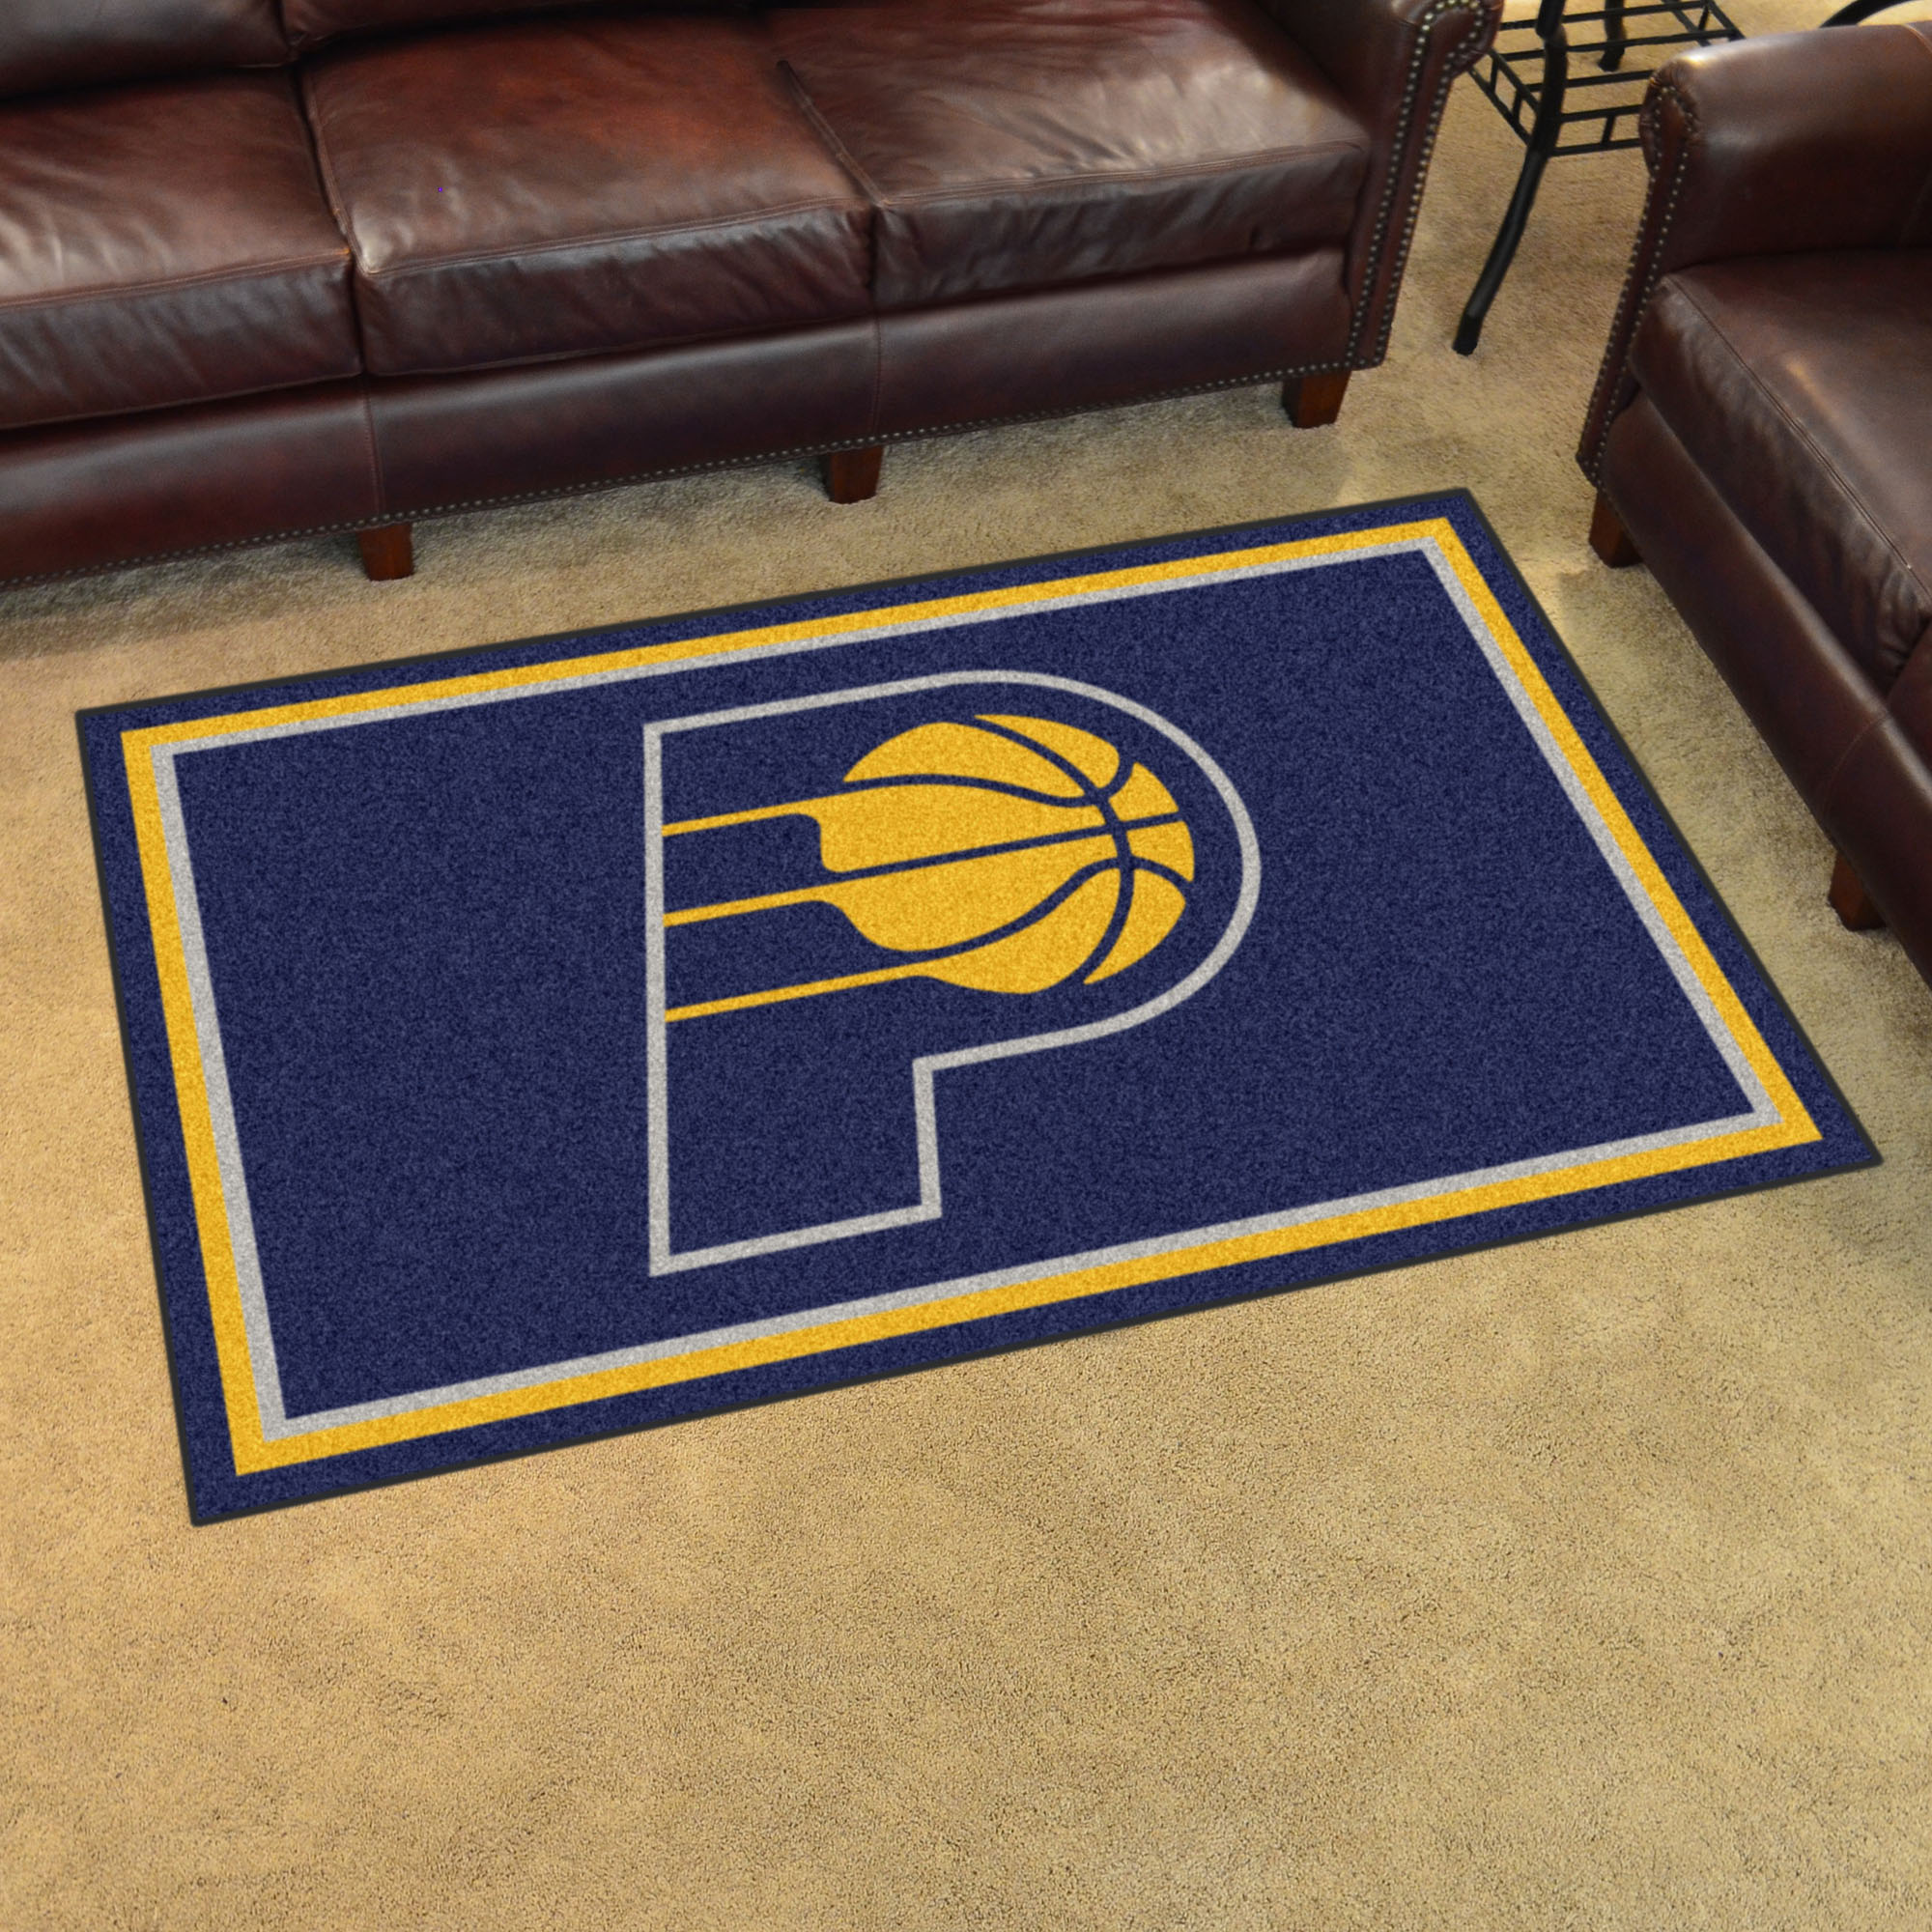 Indiana Pacers 4x6 Area Rug